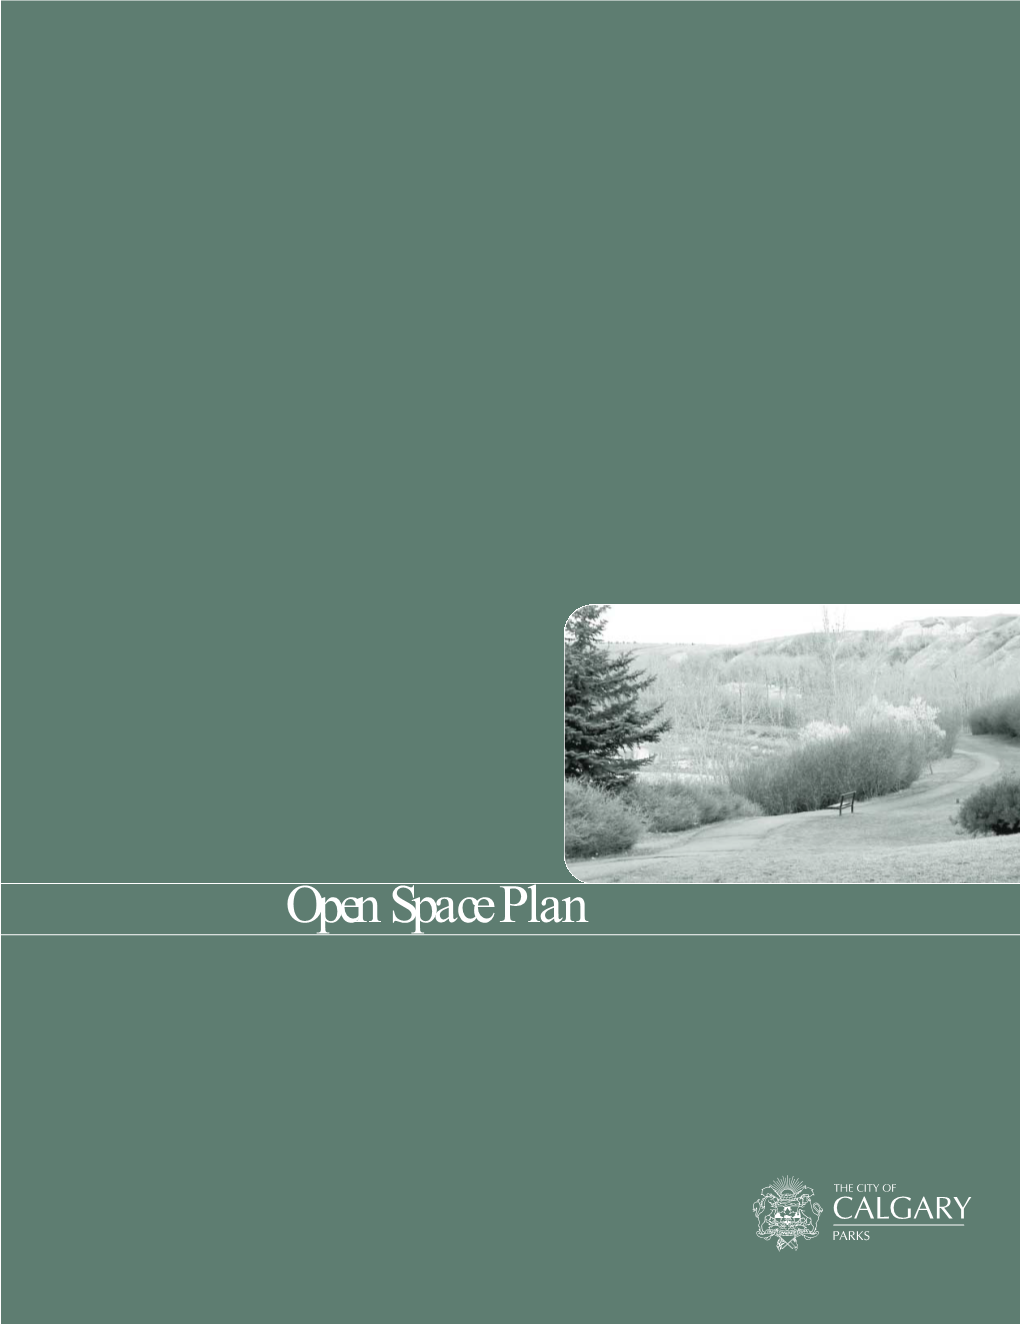 Parks and Open Space Planning